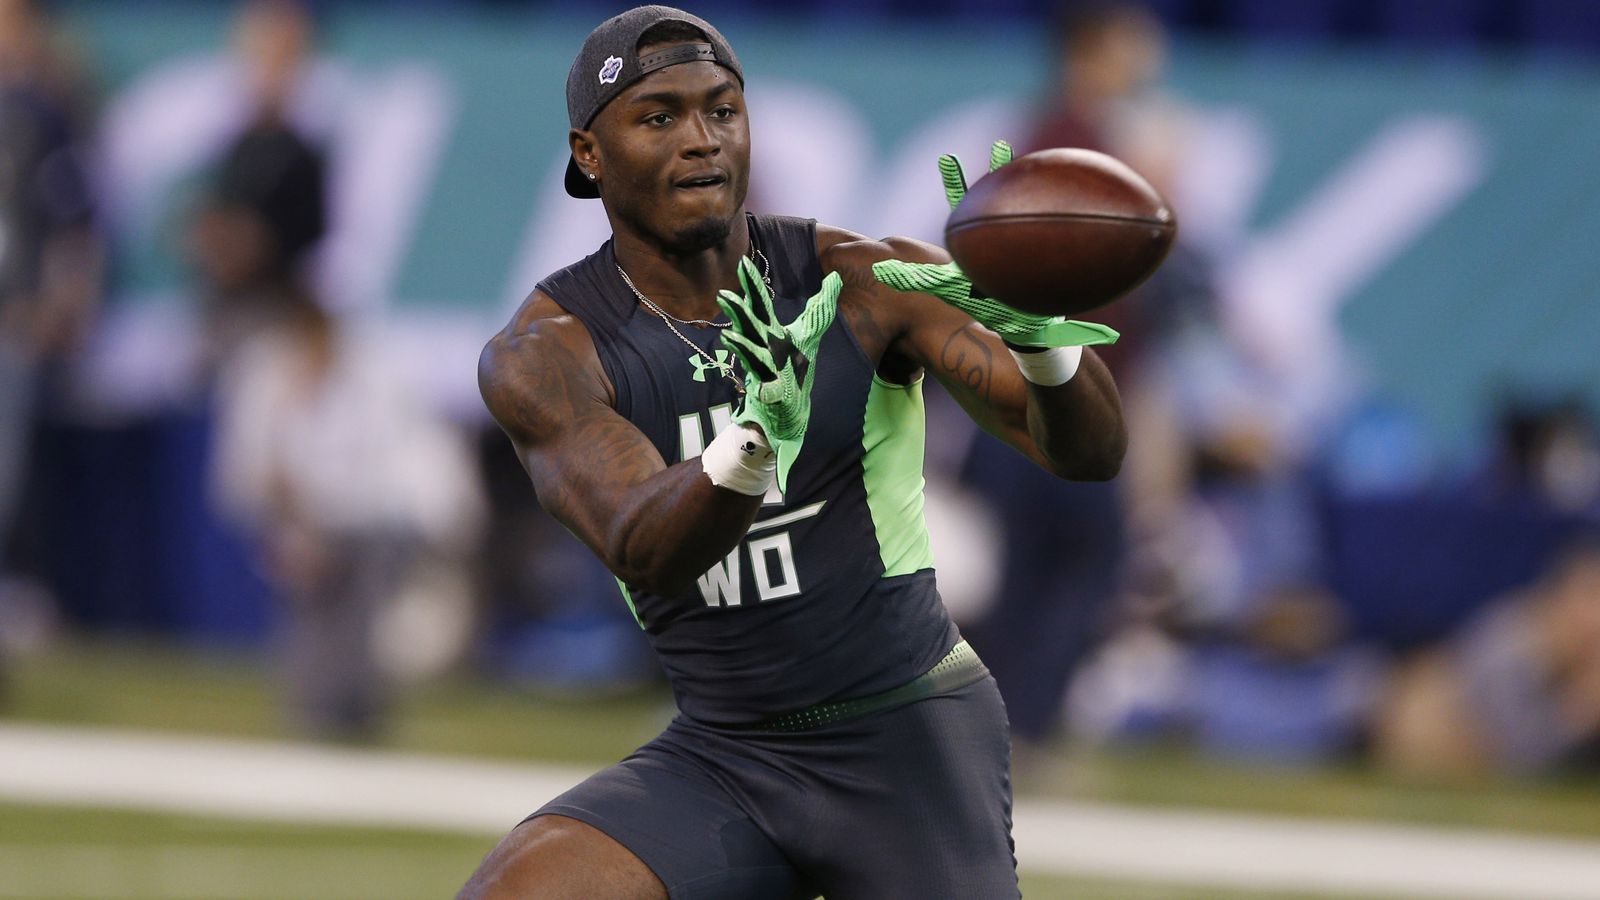 Bengals meeting with Ole Miss WR Laquon Treadwell.